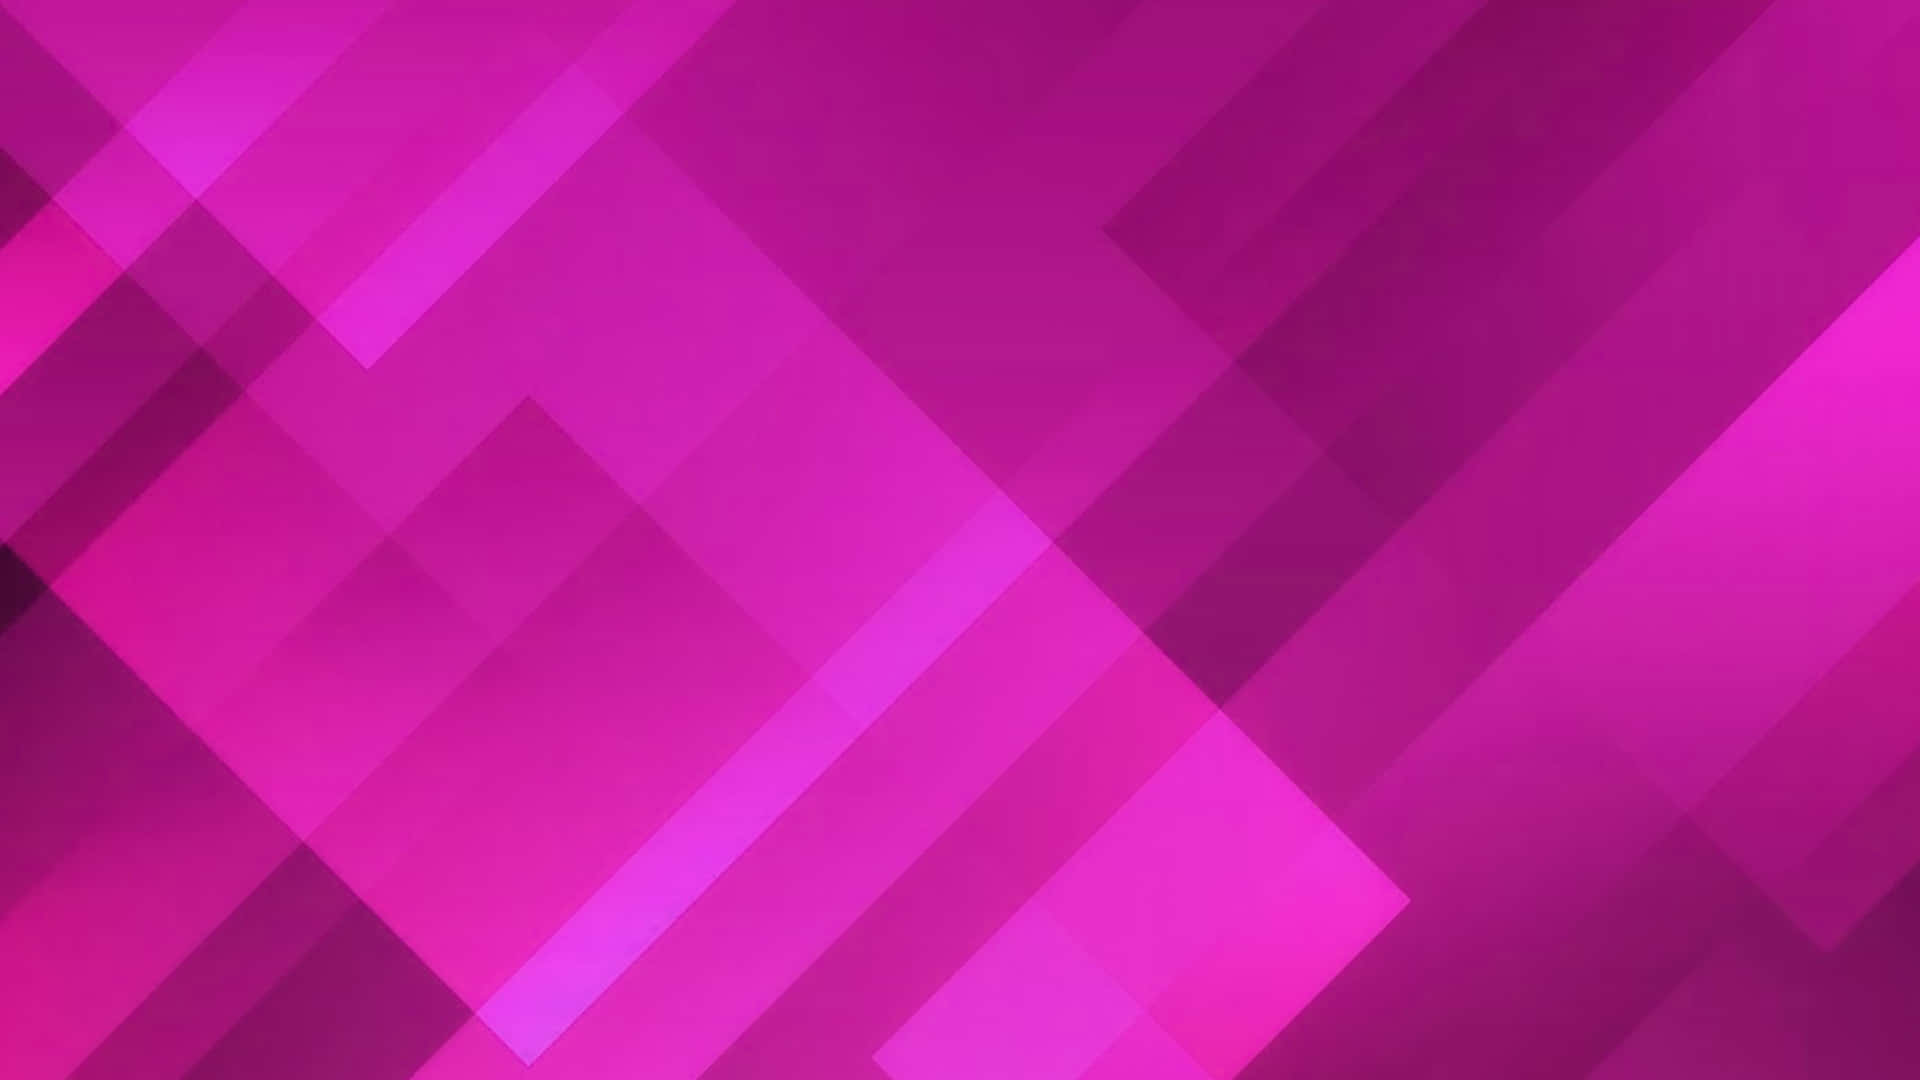 Pink Gradient Background - A Mesmerizing Display Of Vivid Hues Background